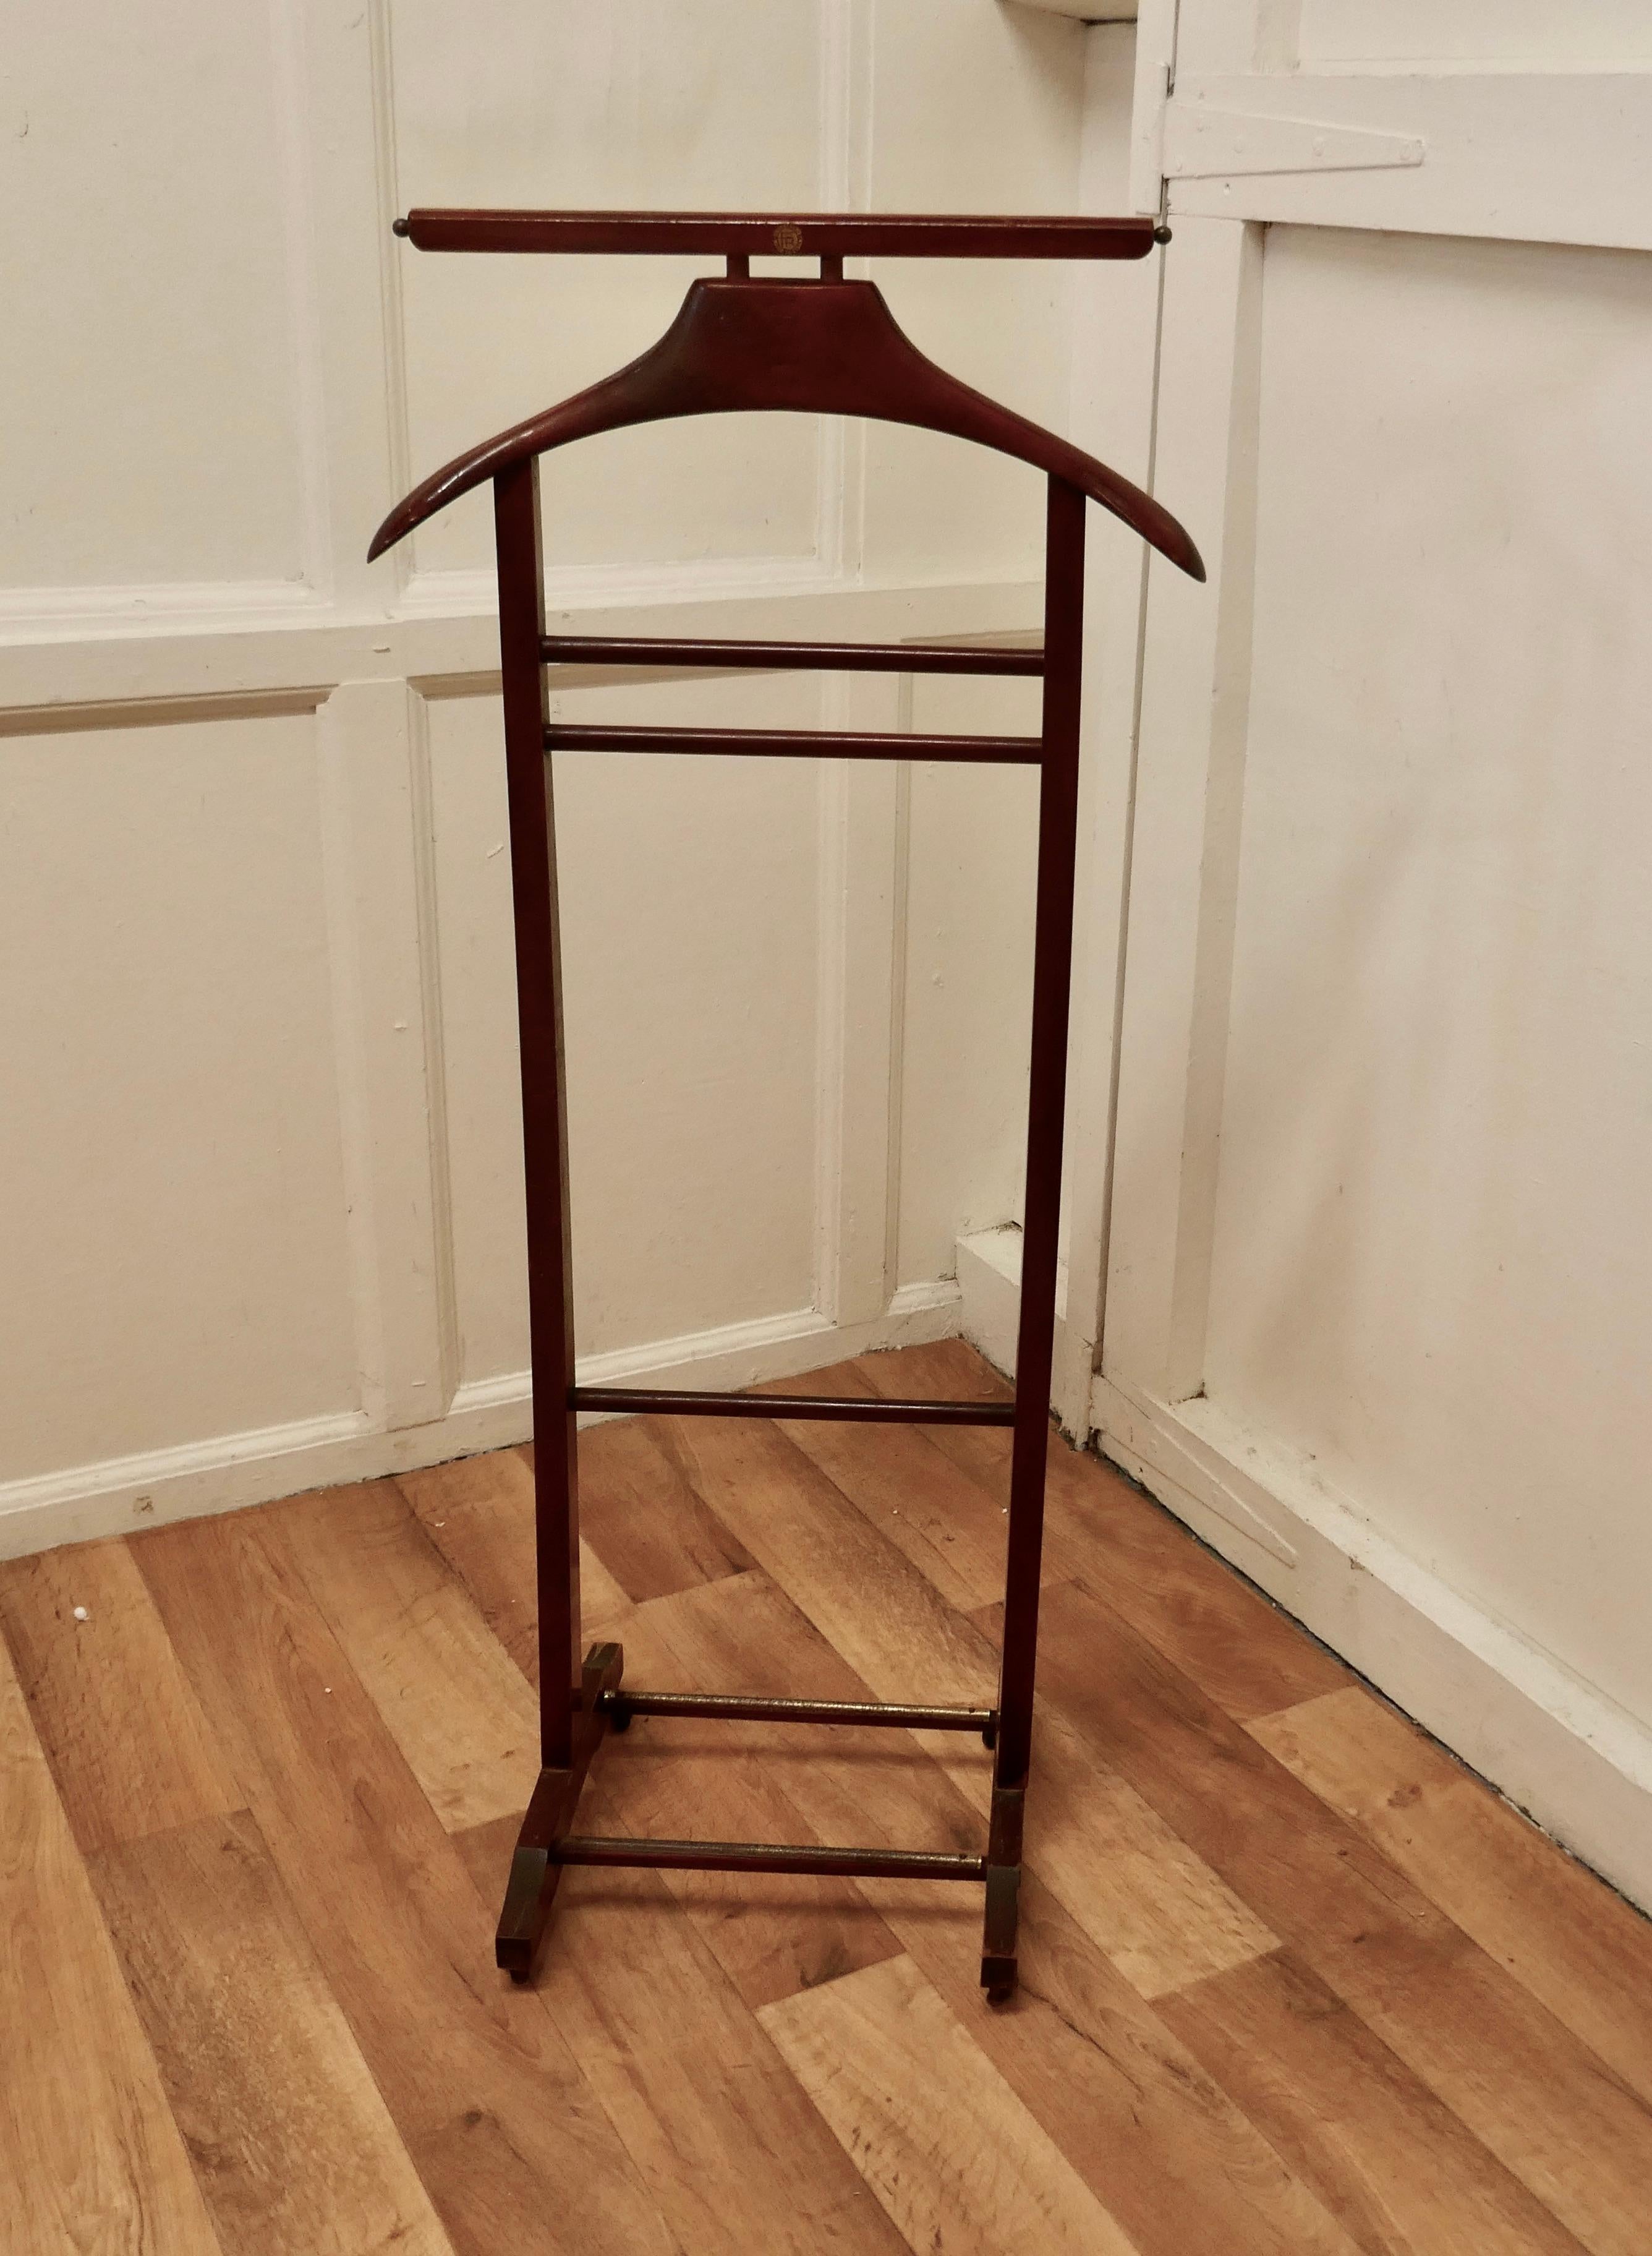 Italian Art Deco gentleman’s floor standing suit hanger by Brevettato

 A very useful piece, the hanger or clothes stand is made in Beech, it will accommodate jacket and trousers, but it would do just as well for your jeans and a jacket overnight